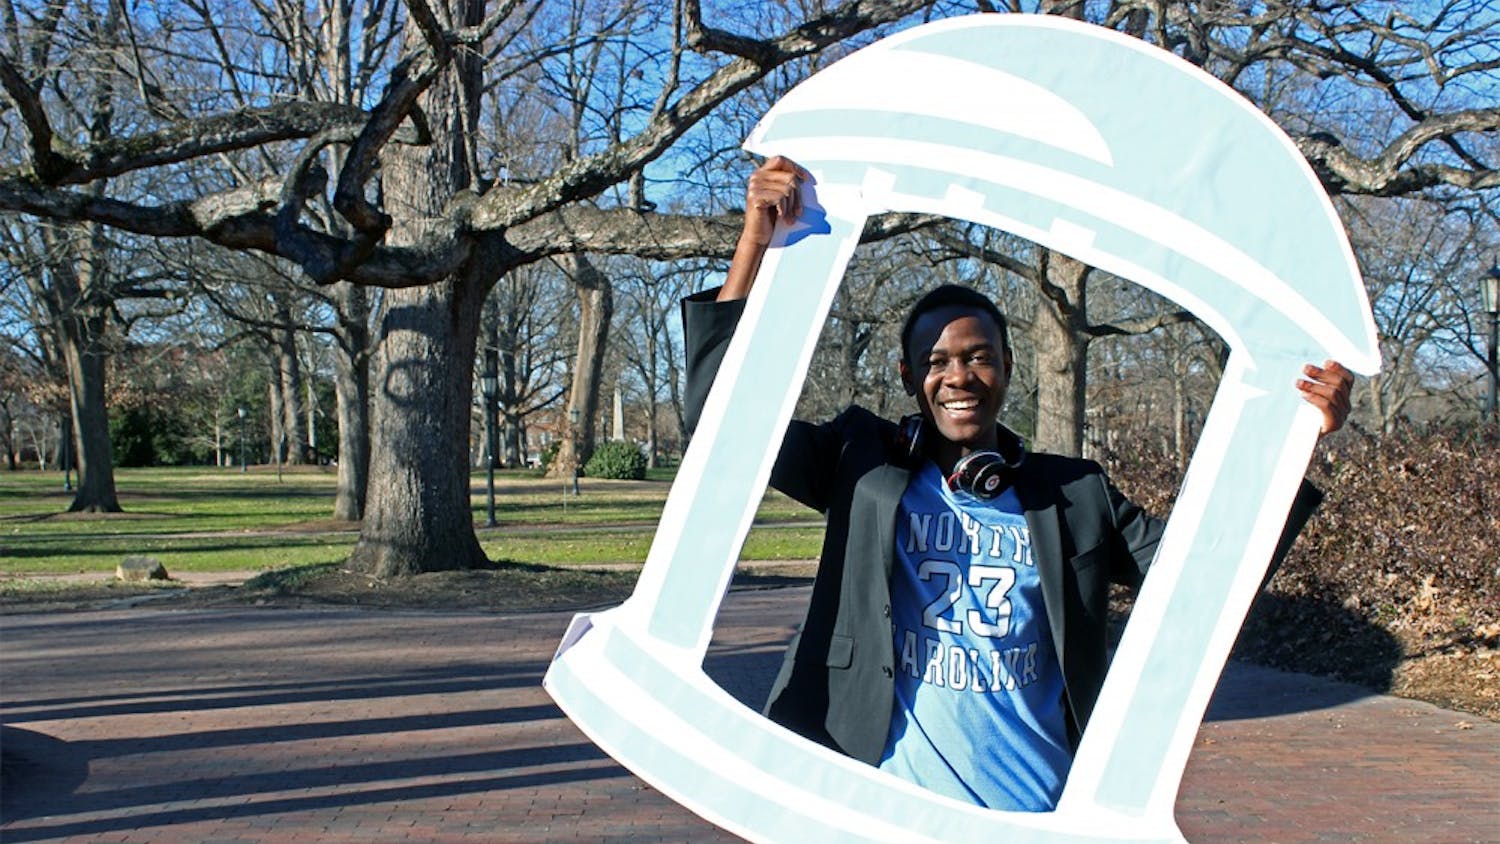 Bradley Opere poses with his Old Well cut out Friday afternoon. Opere held an event to take photographs with people who are supporting his campaign to run for Student Body President. 